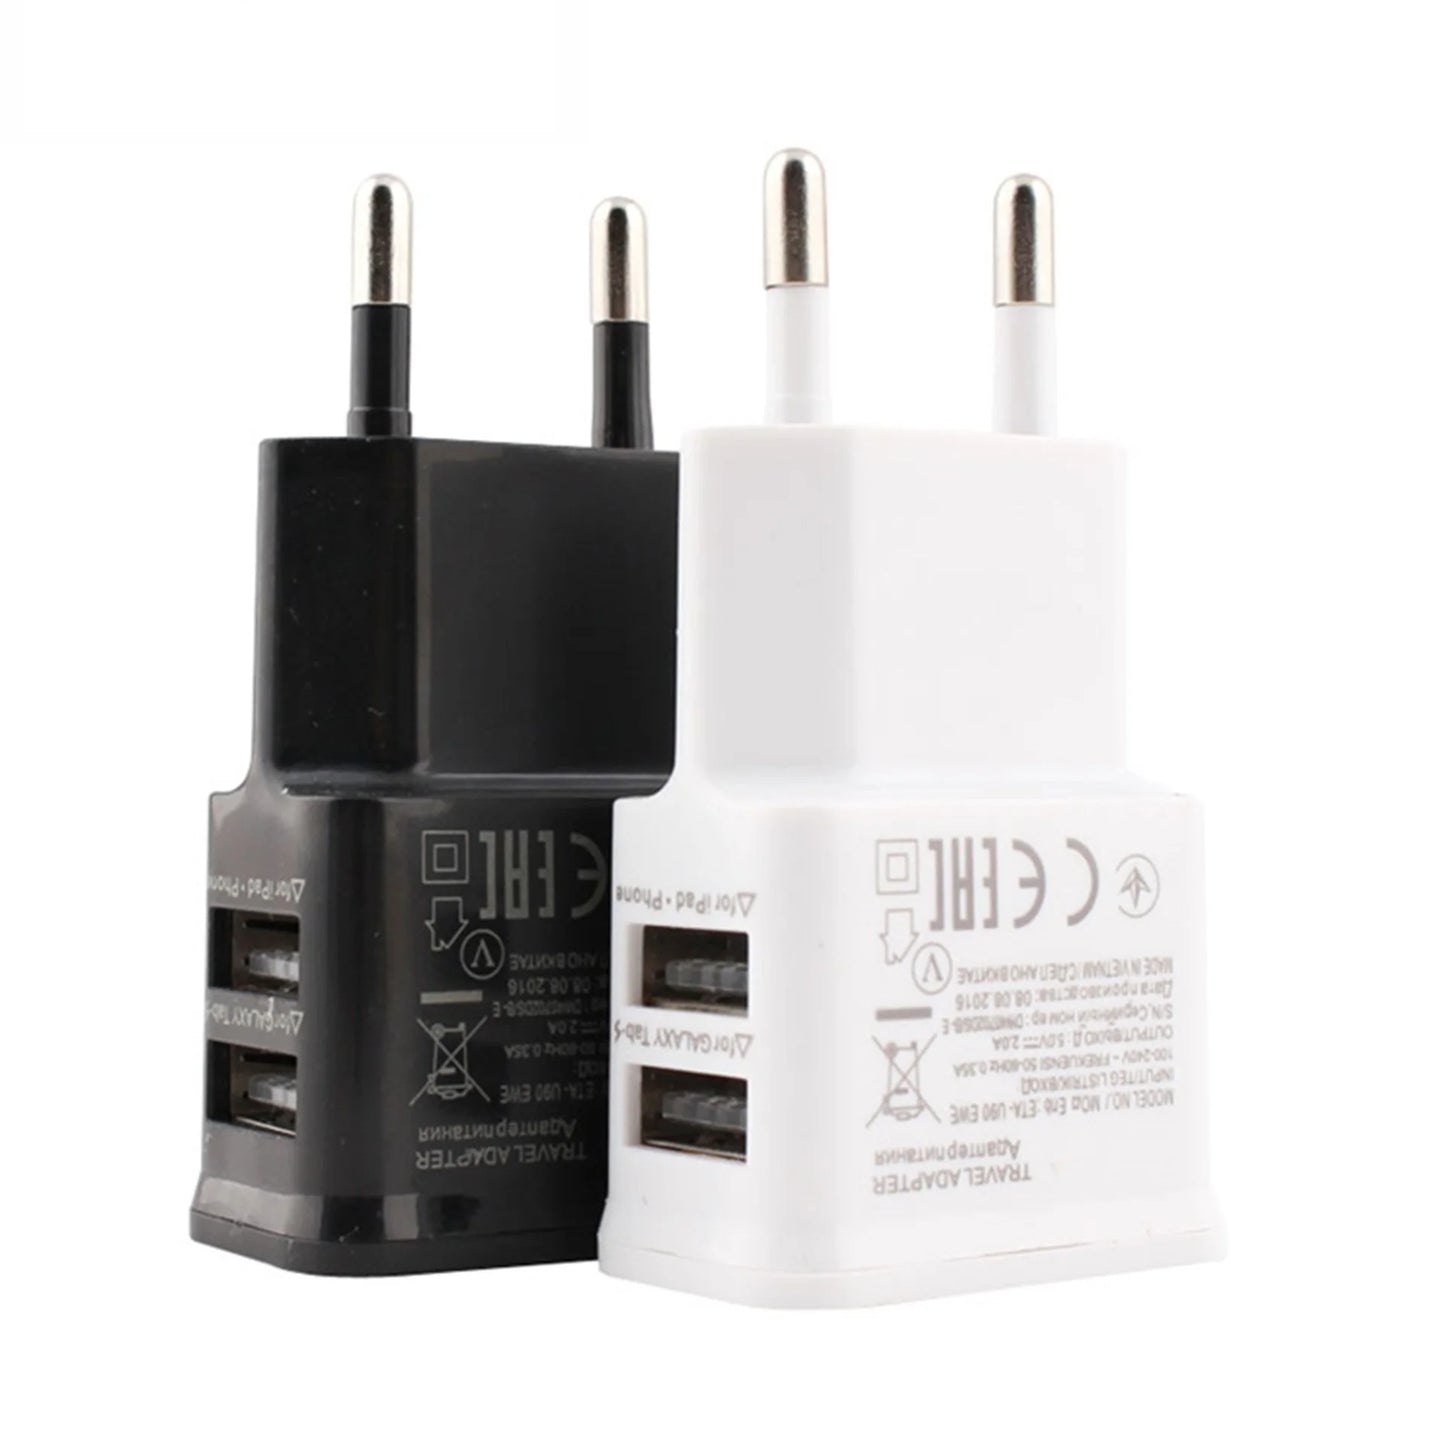 5V Portable Dual USB Power Adapter - Mobile Phone Charger